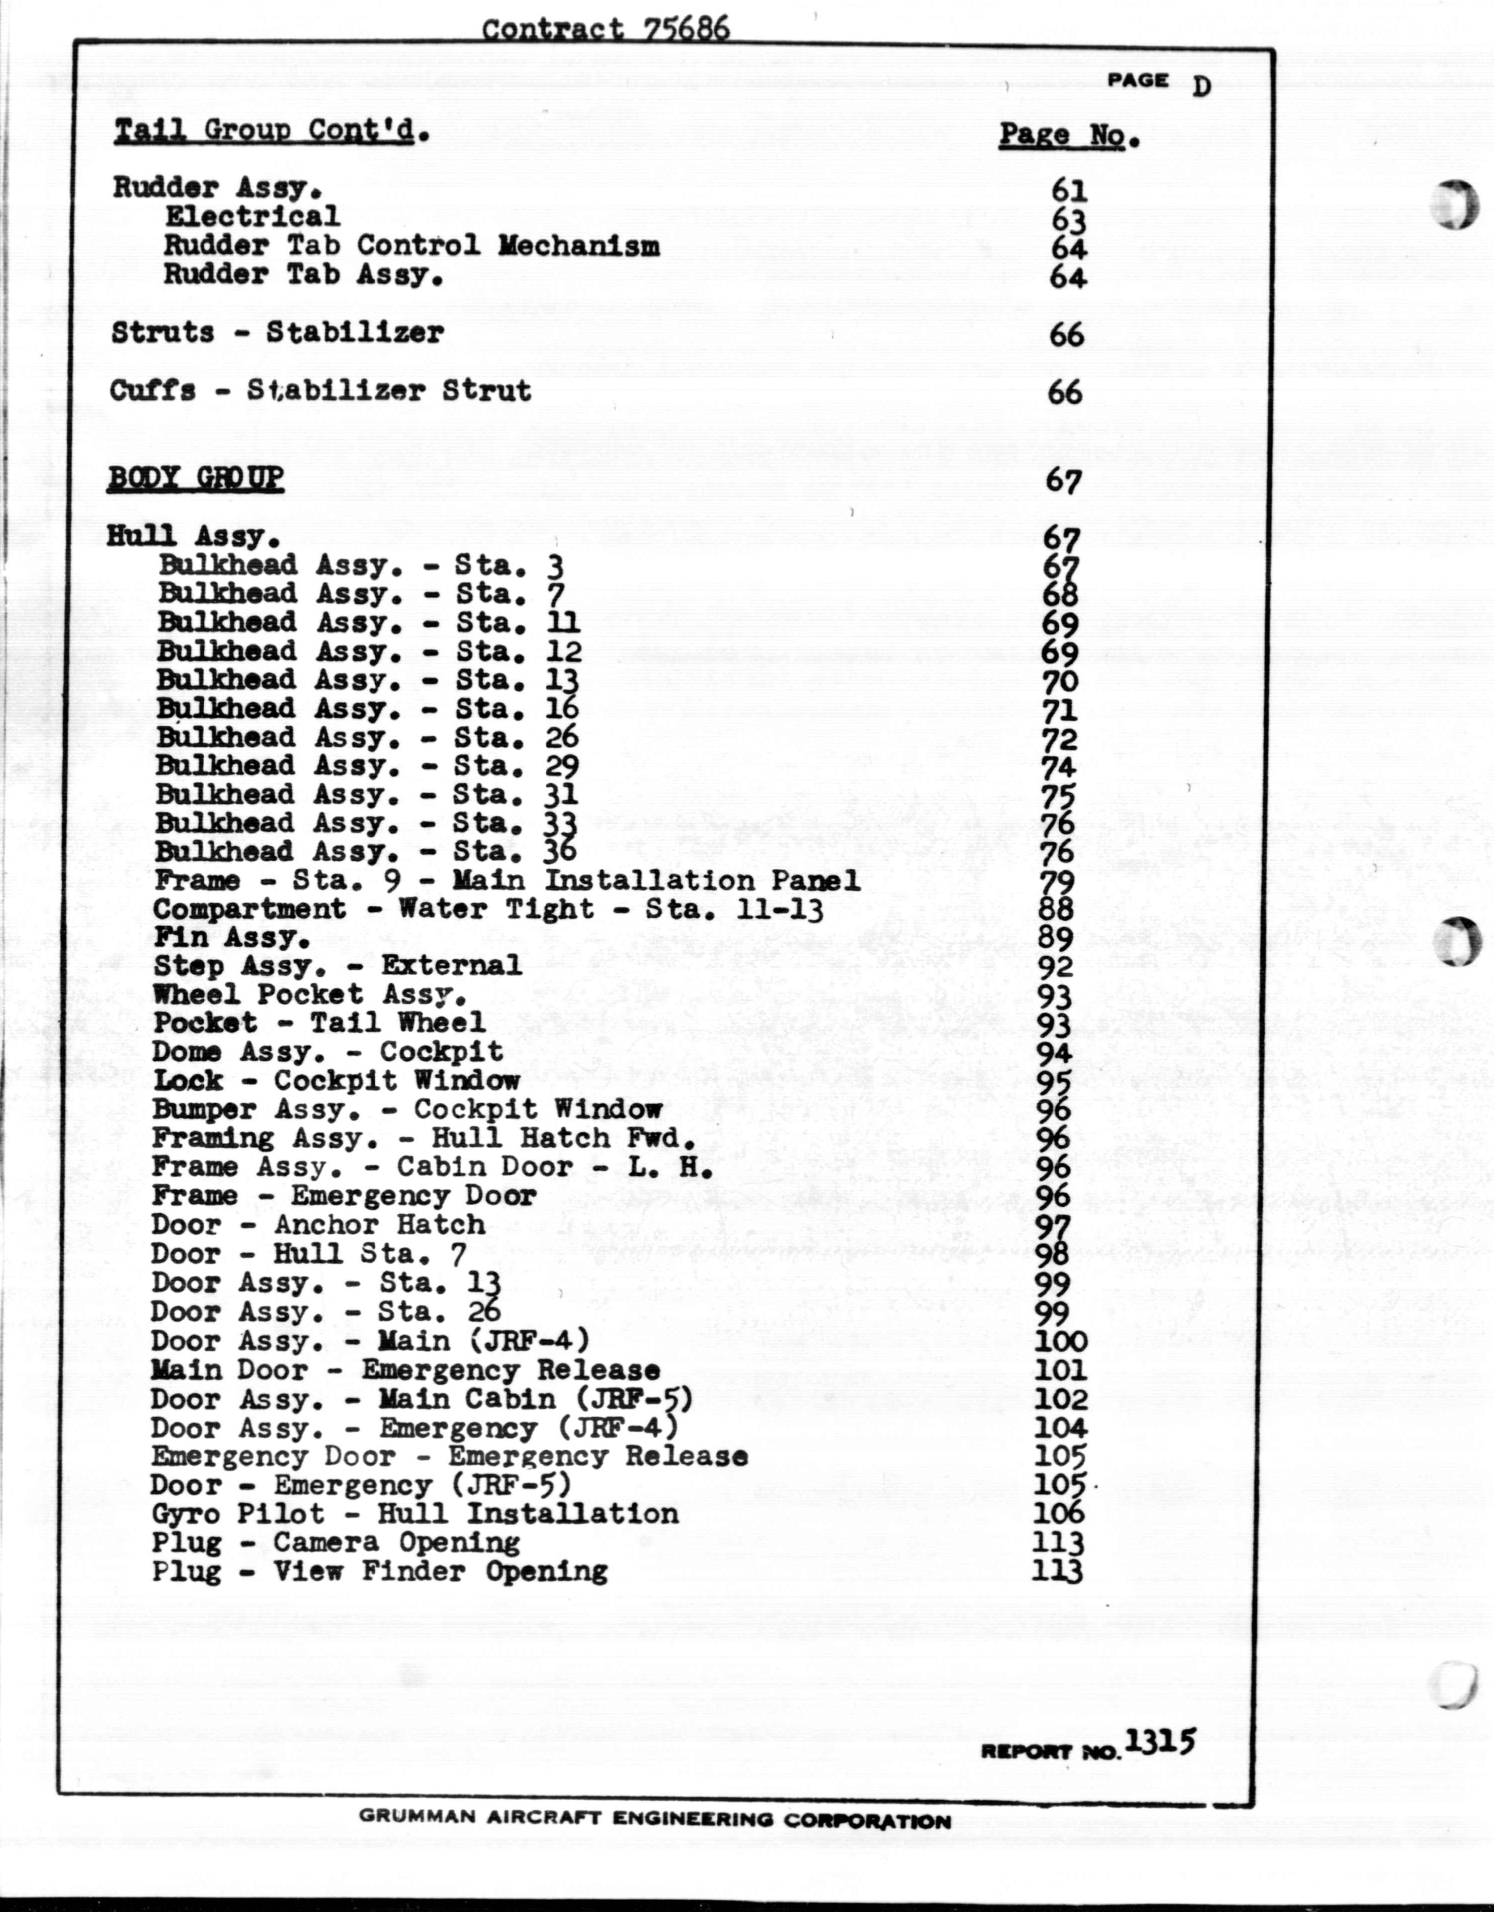 Sample page 4 from AirCorps Library document: Final Spare Parts List with Prices for JRF-4 and -5 Airplanes